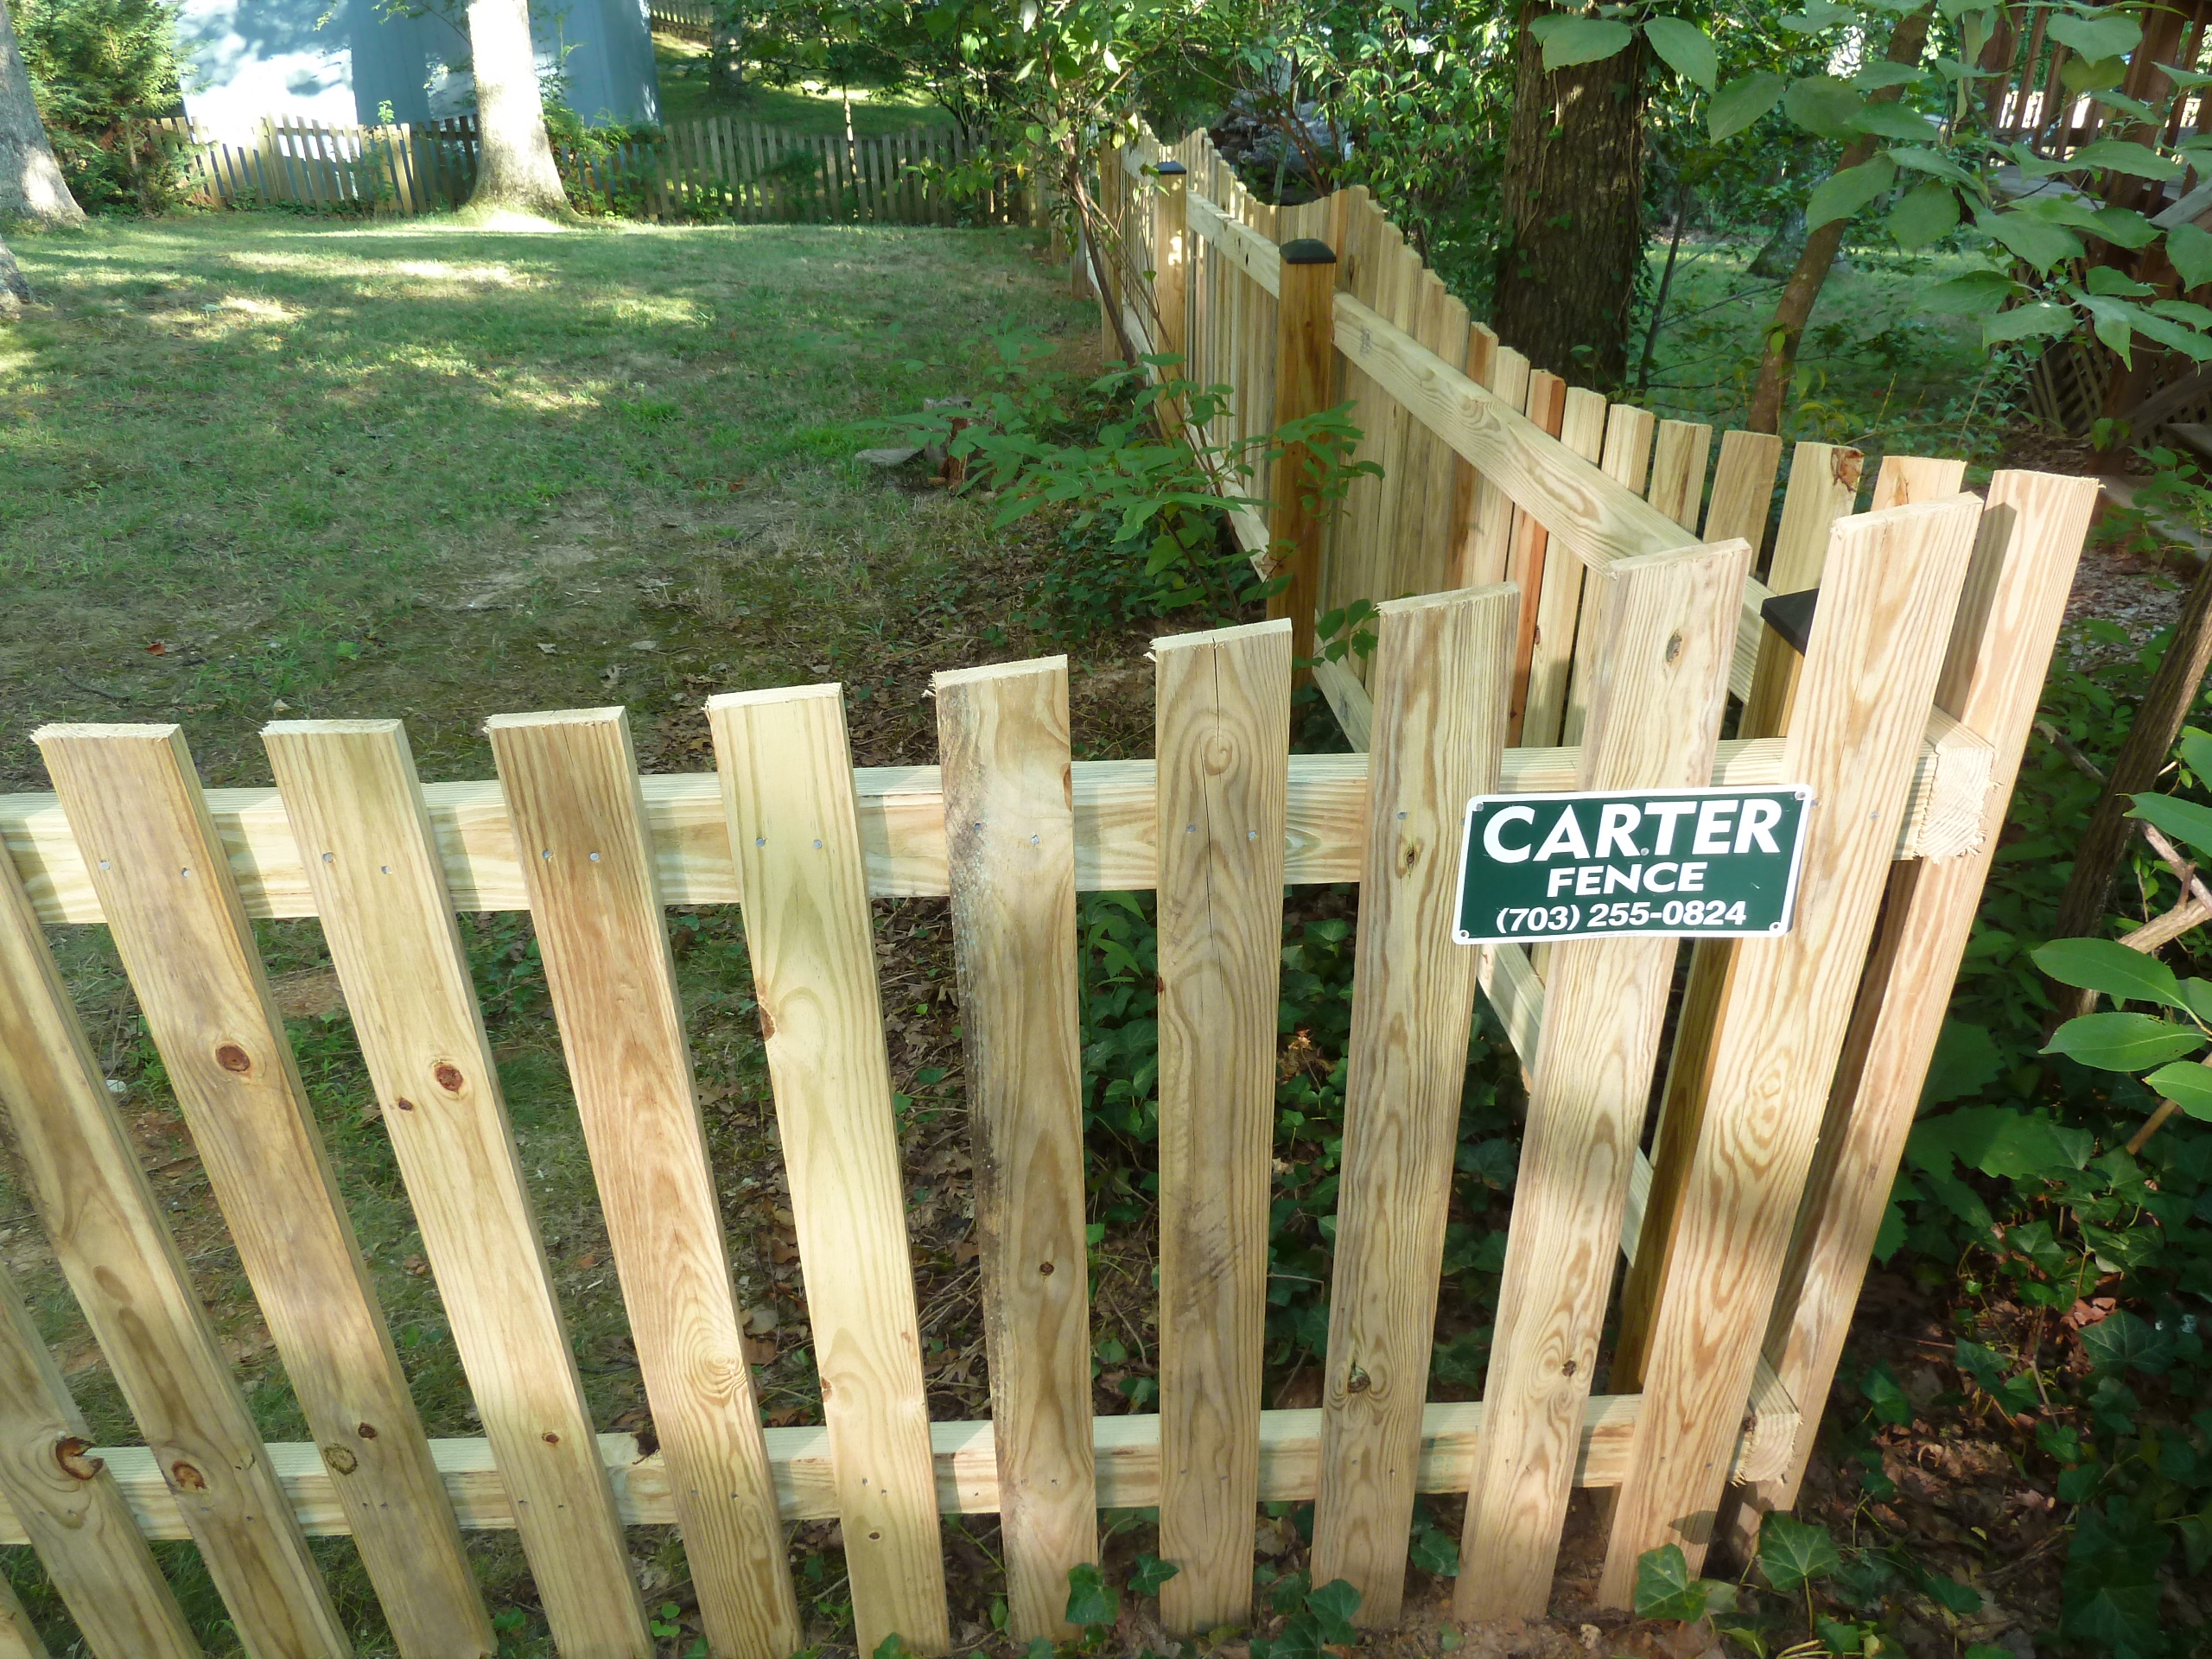 Do Home Buyers Look for a Fenced Yard?